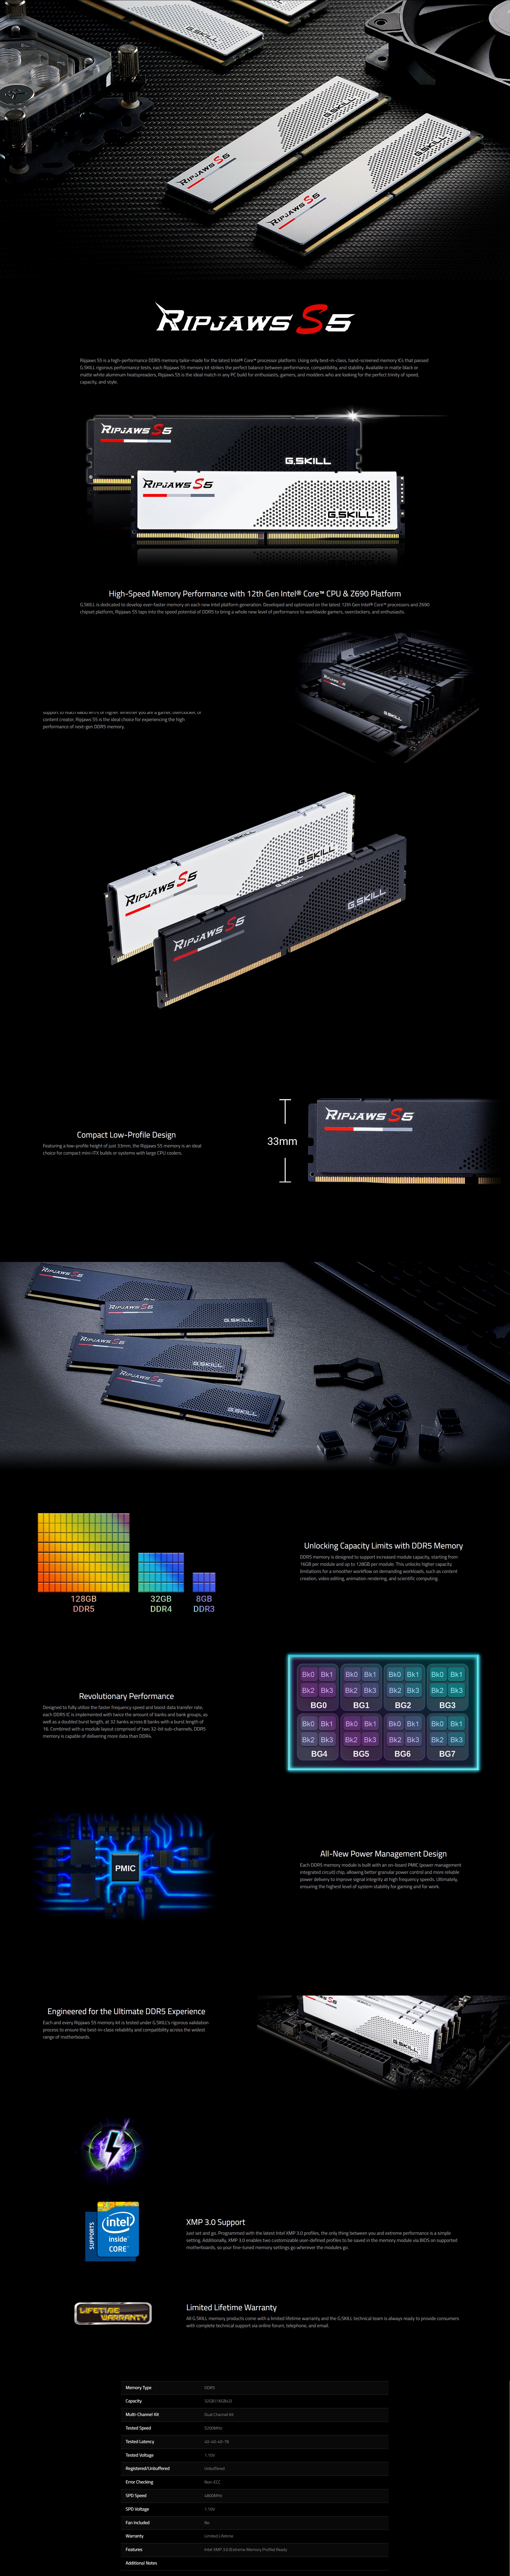 A large marketing image providing additional information about the product G.Skill 32GB Kit (2x16GB) DDR5 Ripjaws S5 C40 5200Mhz - White - Additional alt info not provided